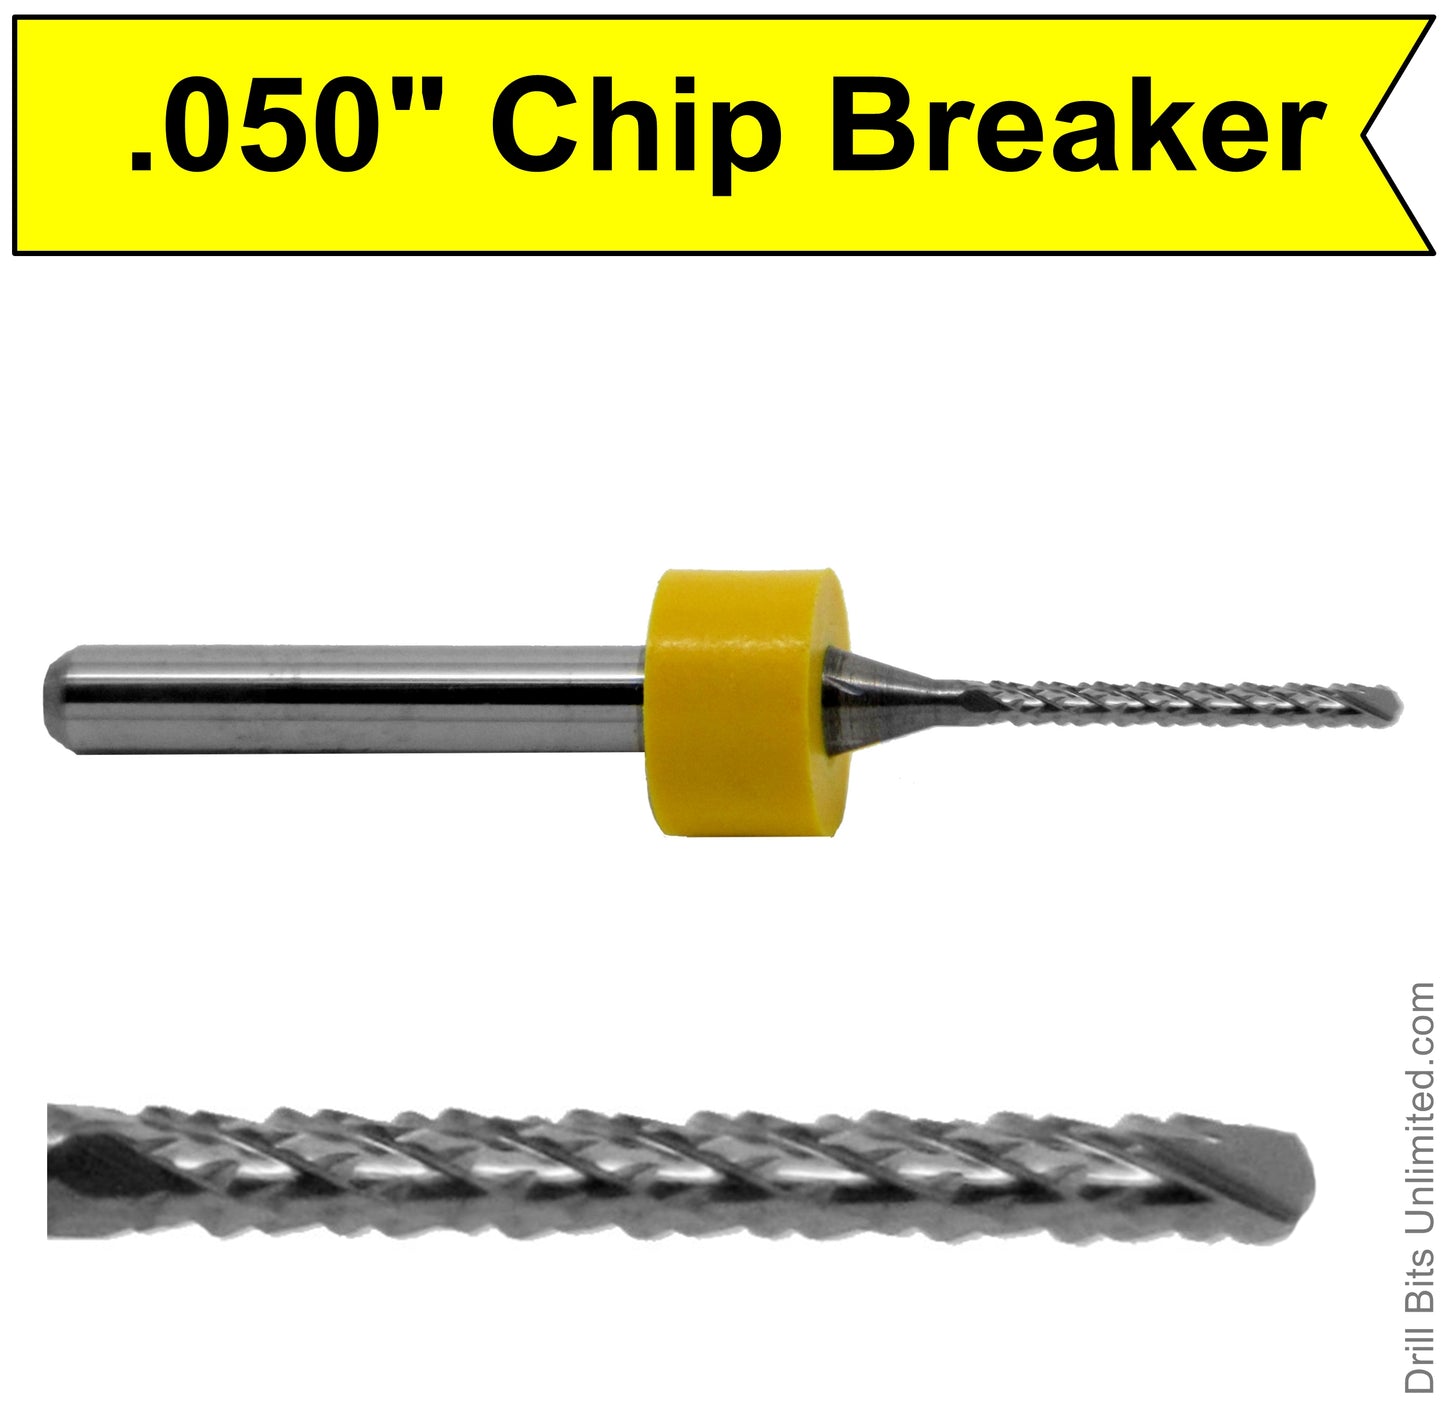 .050" x .550" LOC Chip Breaker Router - Drill Point Tip R154